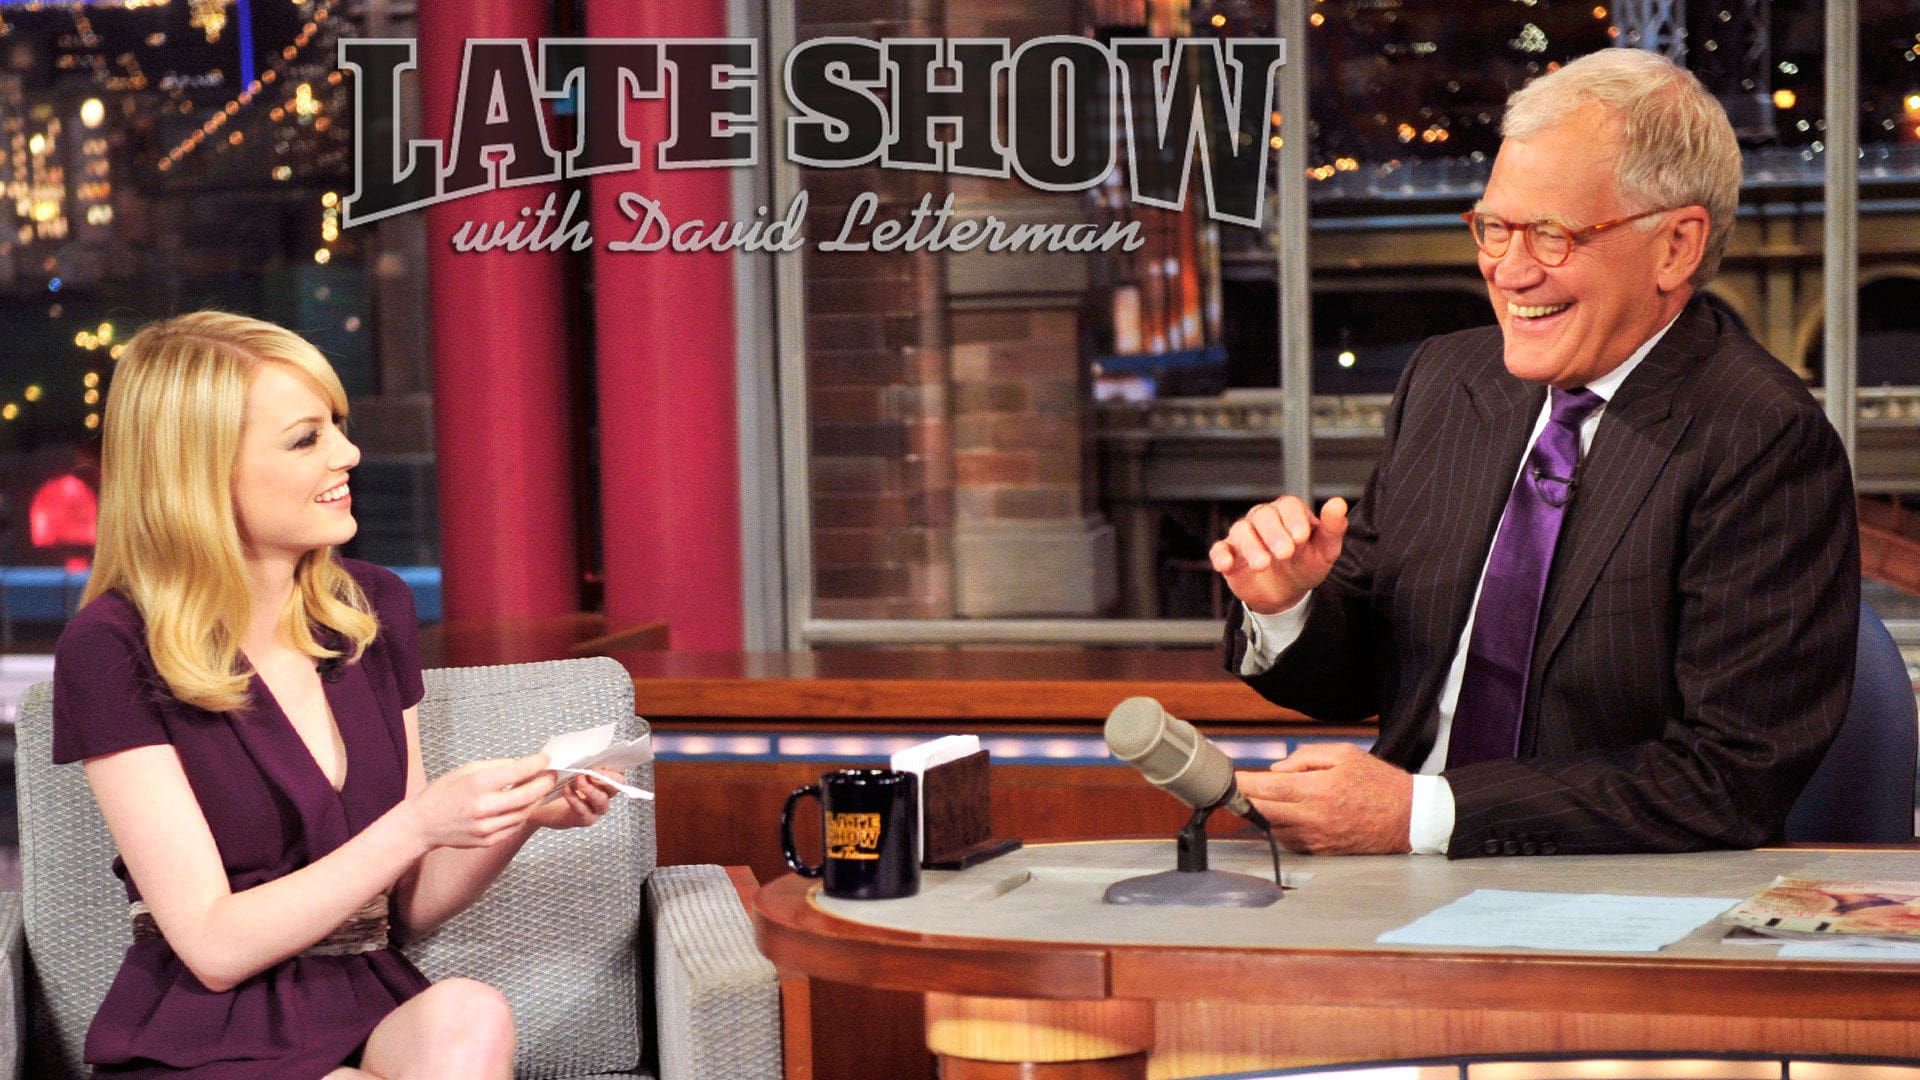 Late Show with David Letterman - Season 22 Episode 59